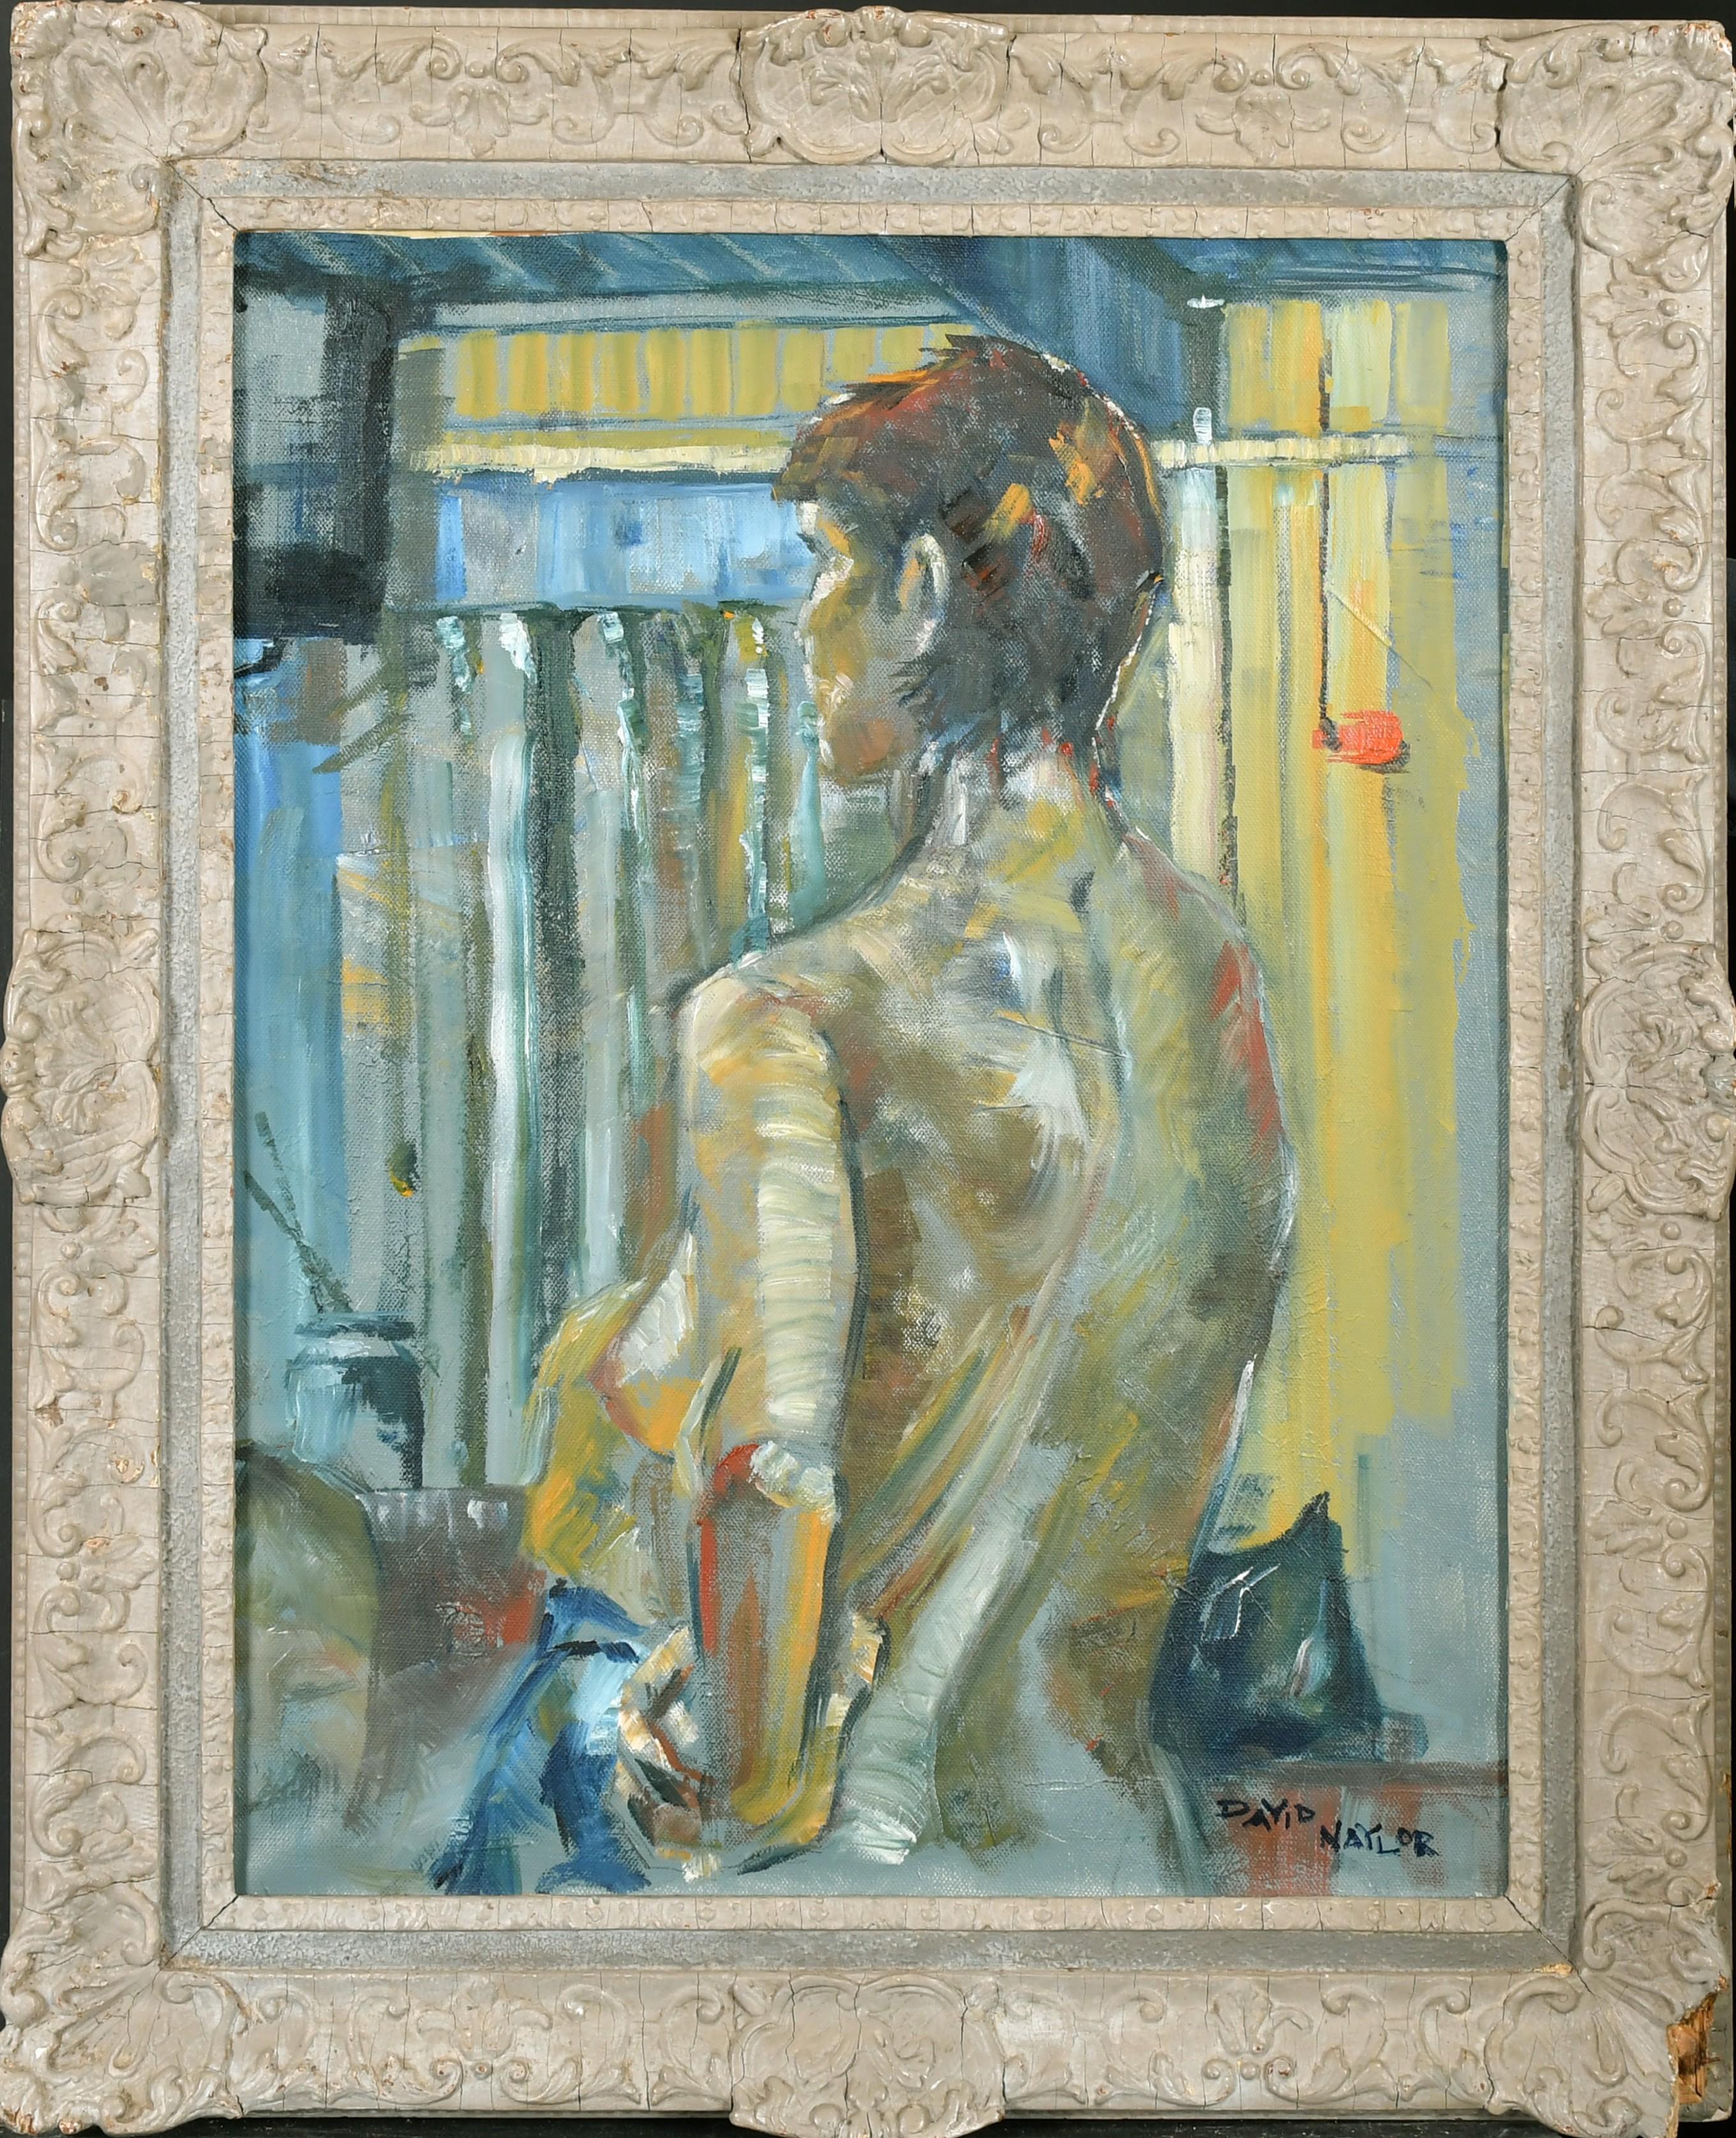 David Naylor Portrait Painting - Large Modern British Impressionist Signed Oil Painting Nude Model in Interior